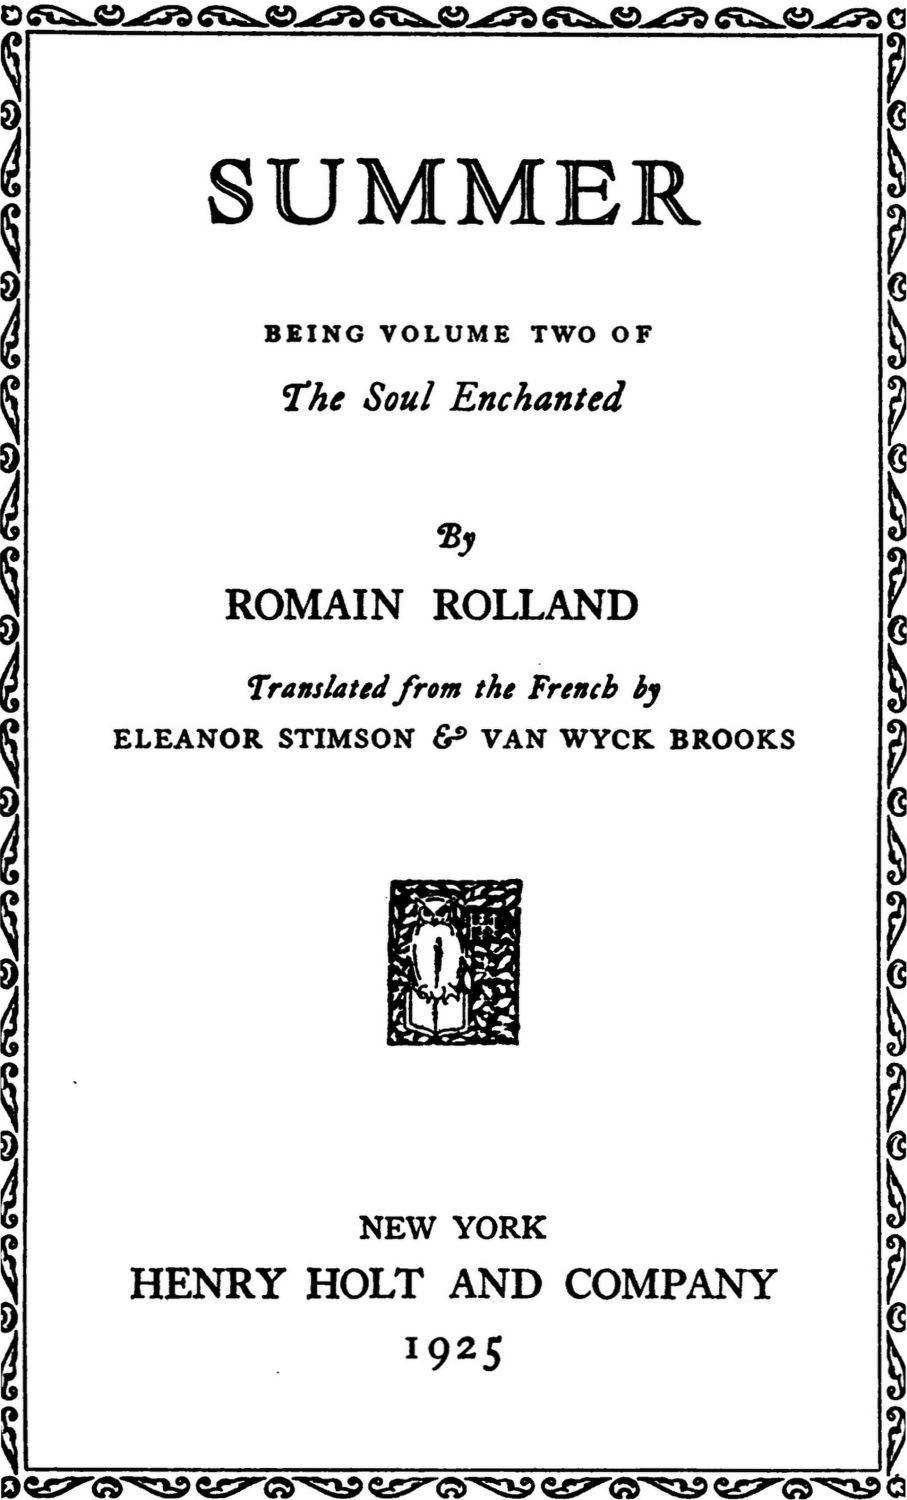 The Project Gutenberg eBook of Summer, by Romain Rolland.